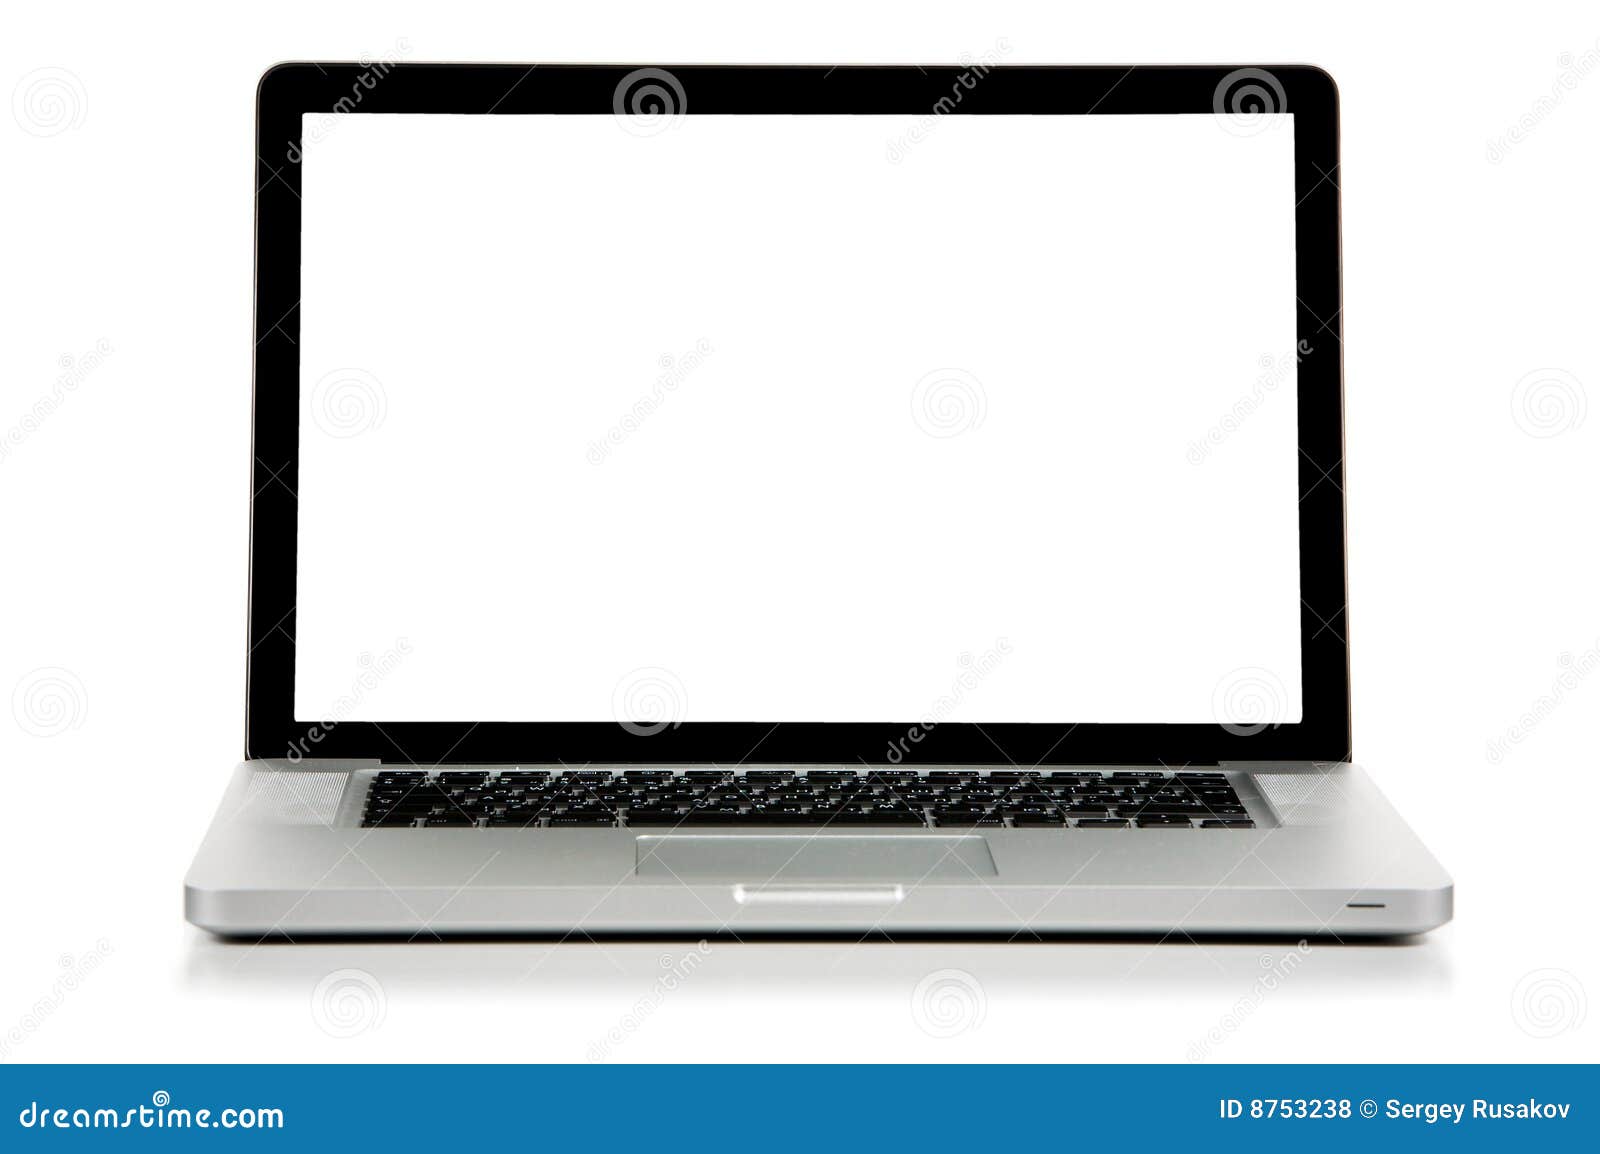 New Laptop With White Screen Front View Stock Photo Image Of Digital